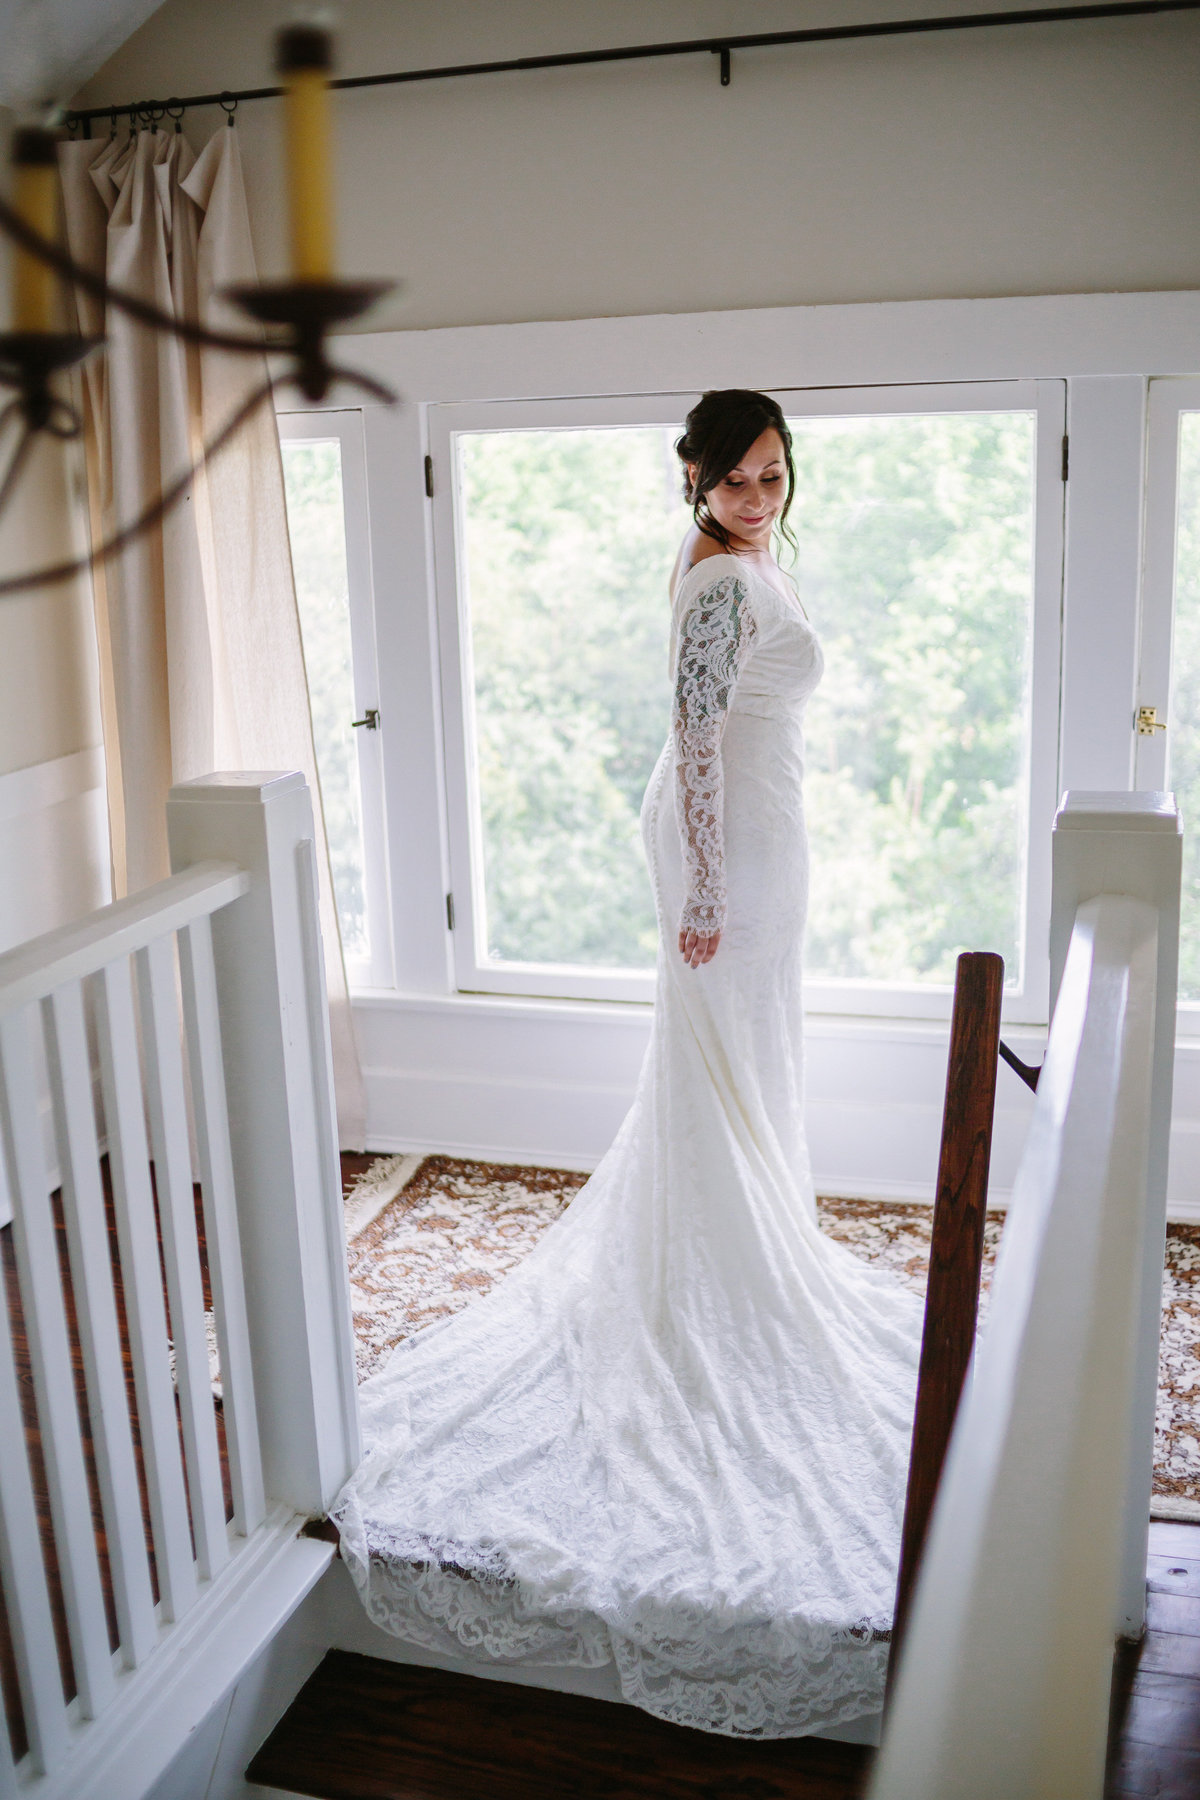 bride at top of stairs at an airbnb rental for getting ready before her wedding